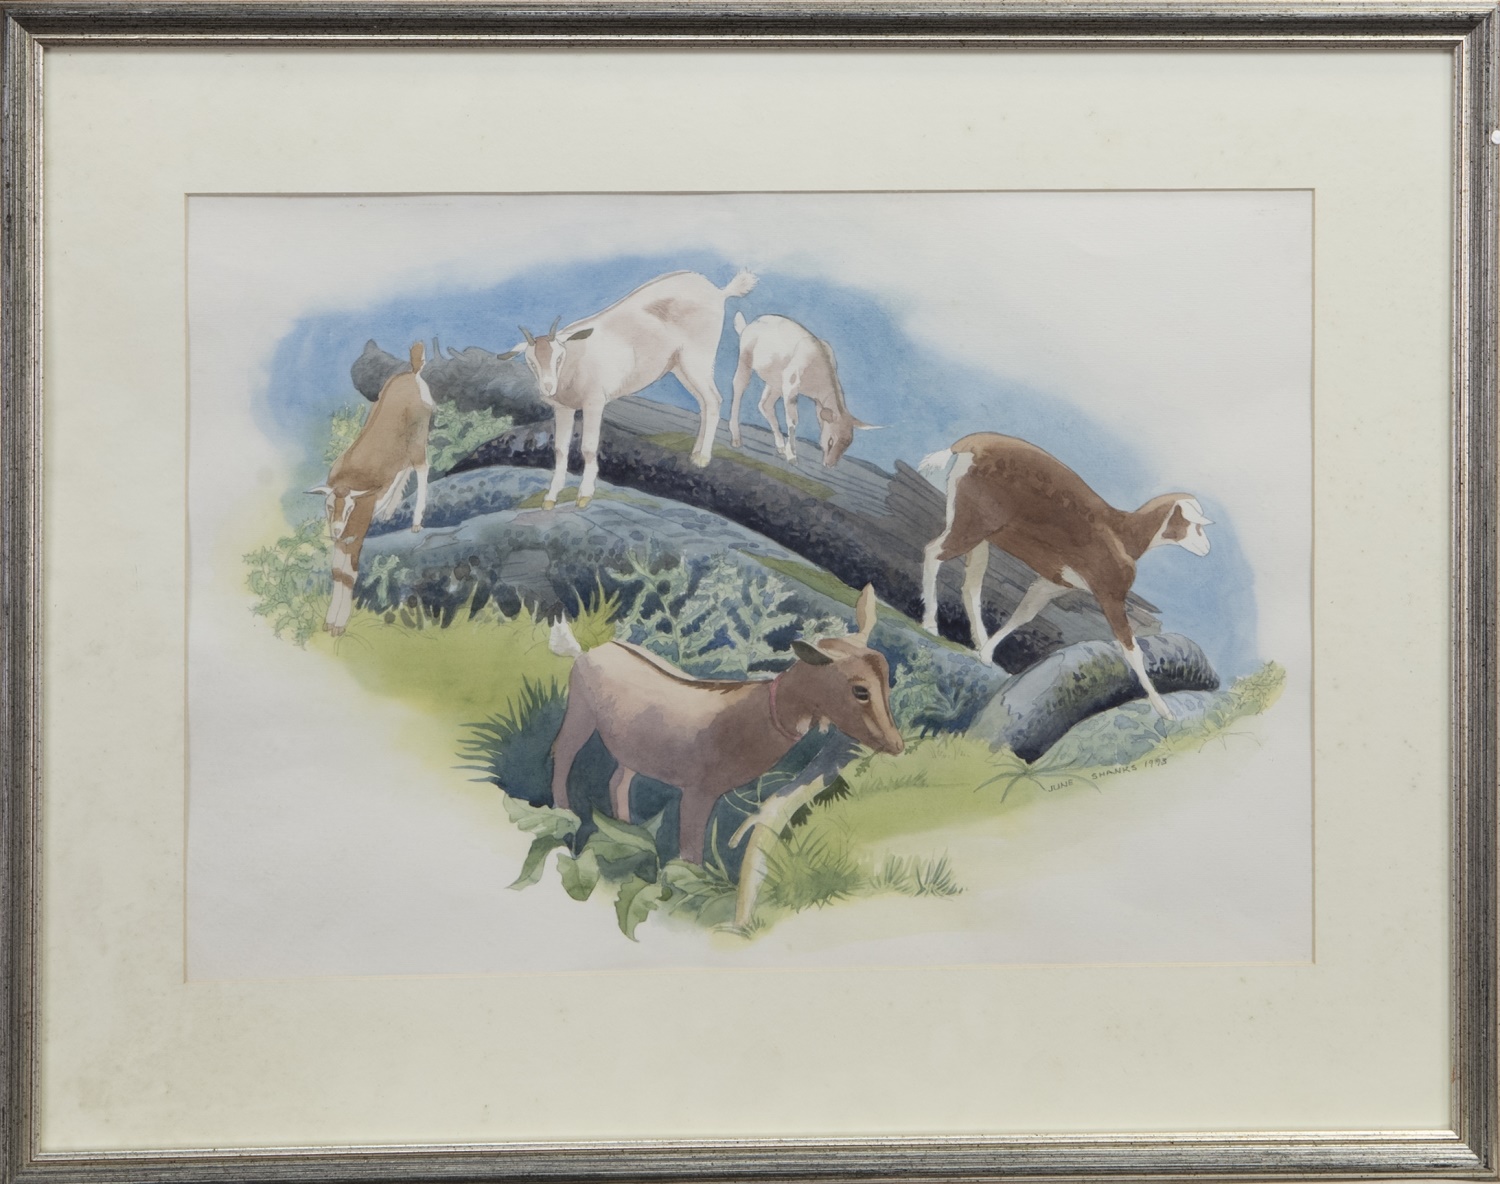 GOATS AT DUCHAL, A WATERCOLOUR BY JUNE SHANKS